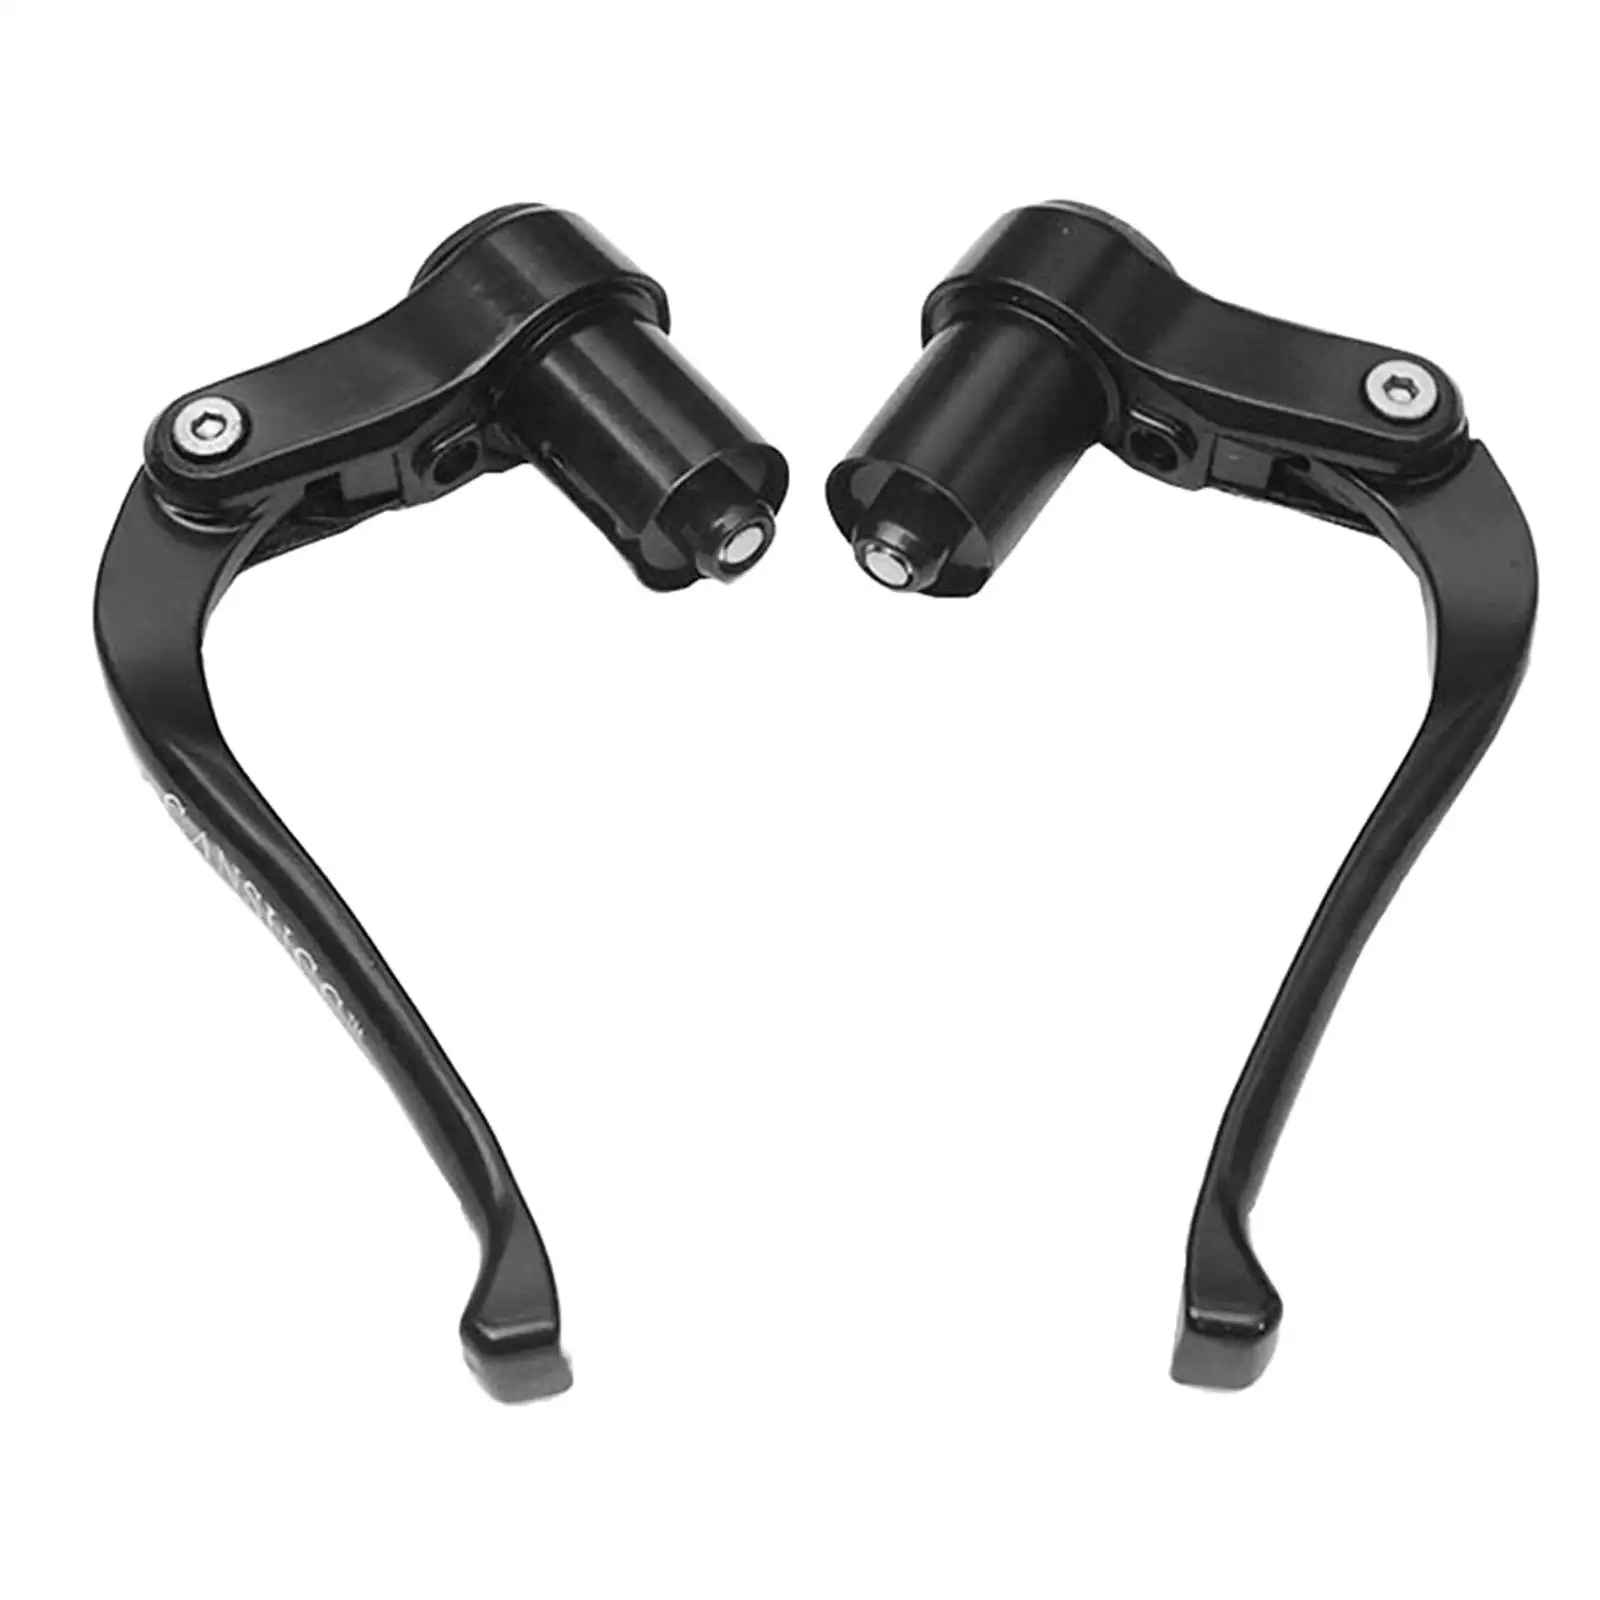 2 Pieces Bicycle Brake Levers Bar End TT Fixed Gear Handlebar Brakes Accessory